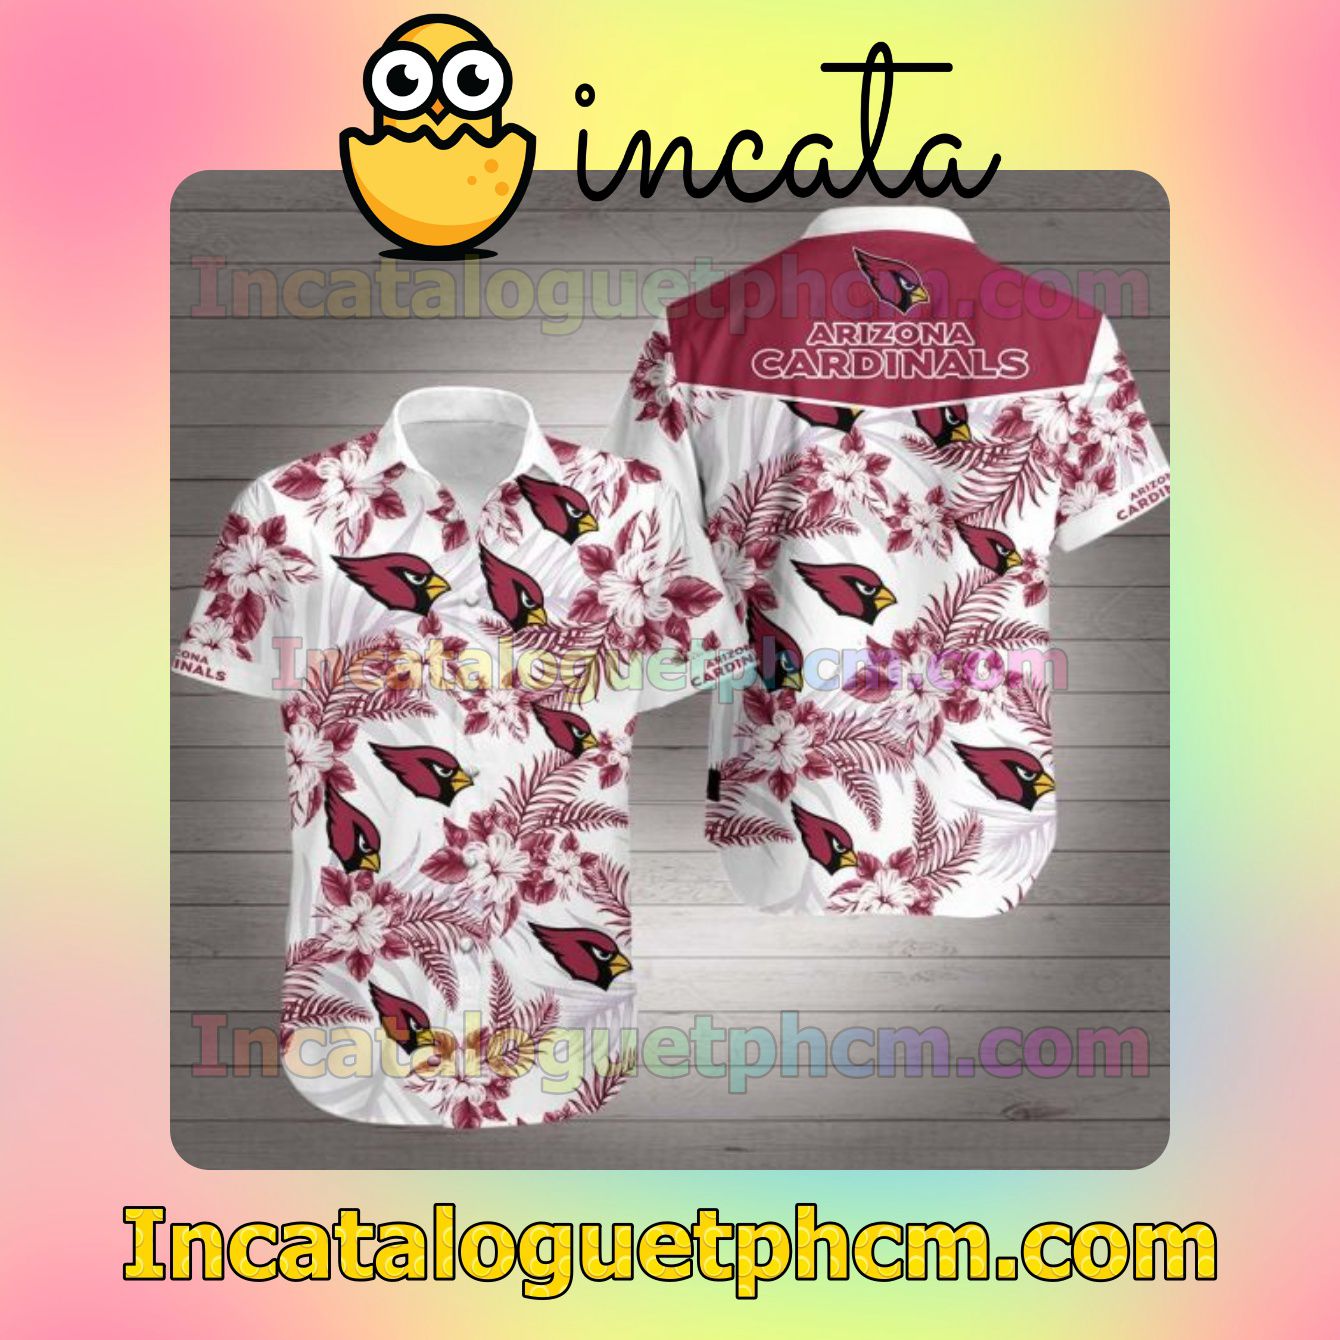 Arizona Cardinals Logo And Hibiscus Flowers Red White Men's Casual Shirts